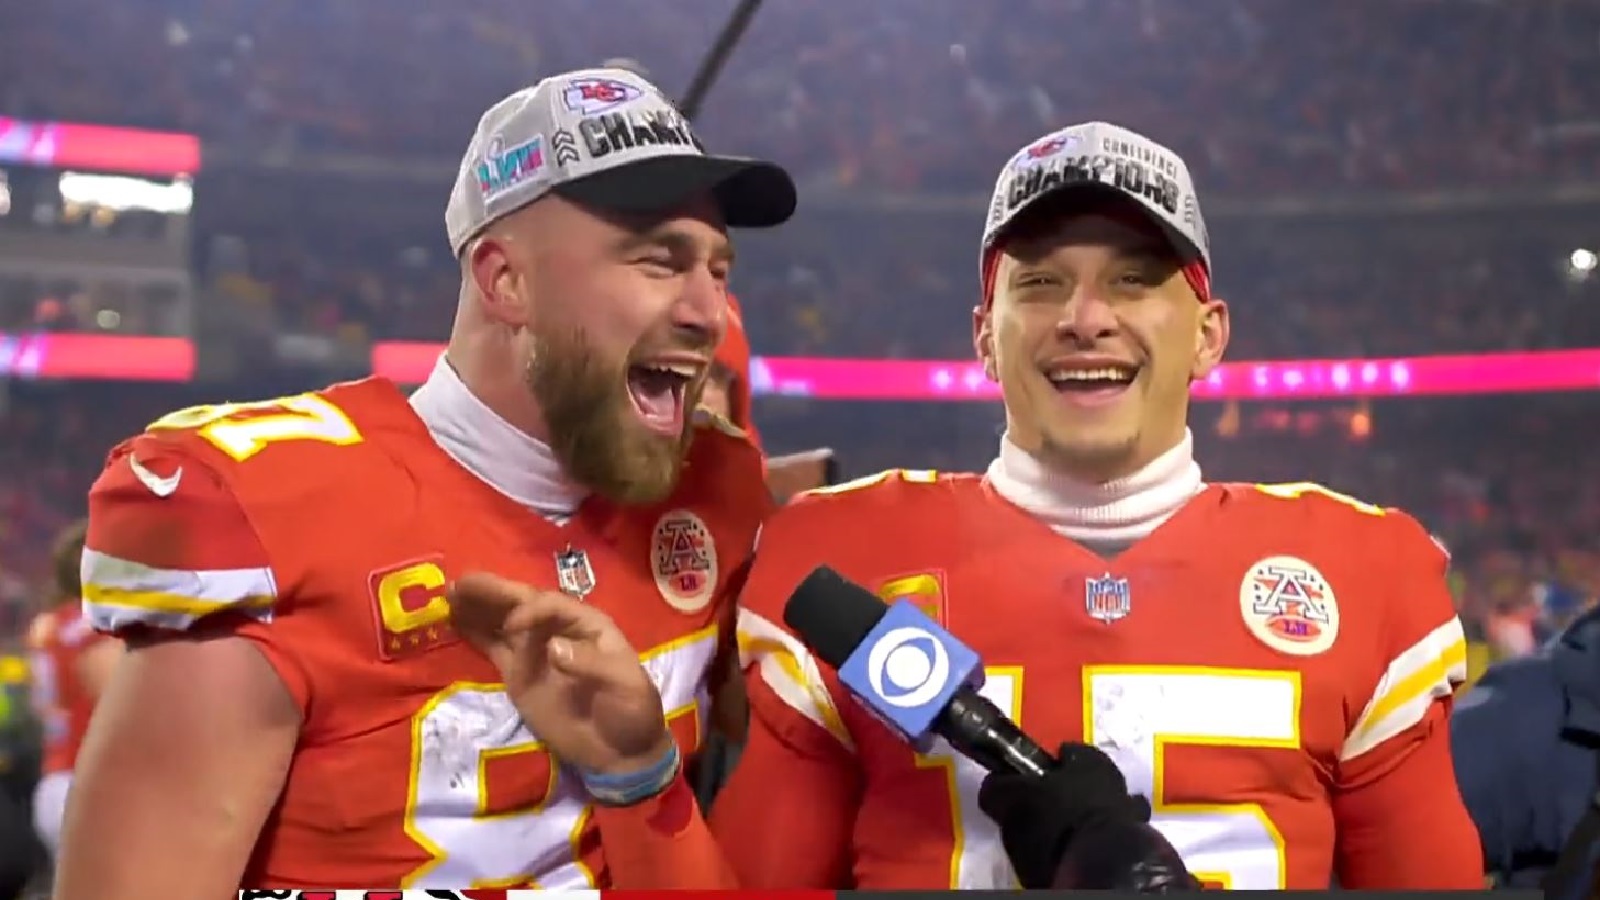 Patrick Mahomes, Travis Kelce in attendance for Reds at Royals